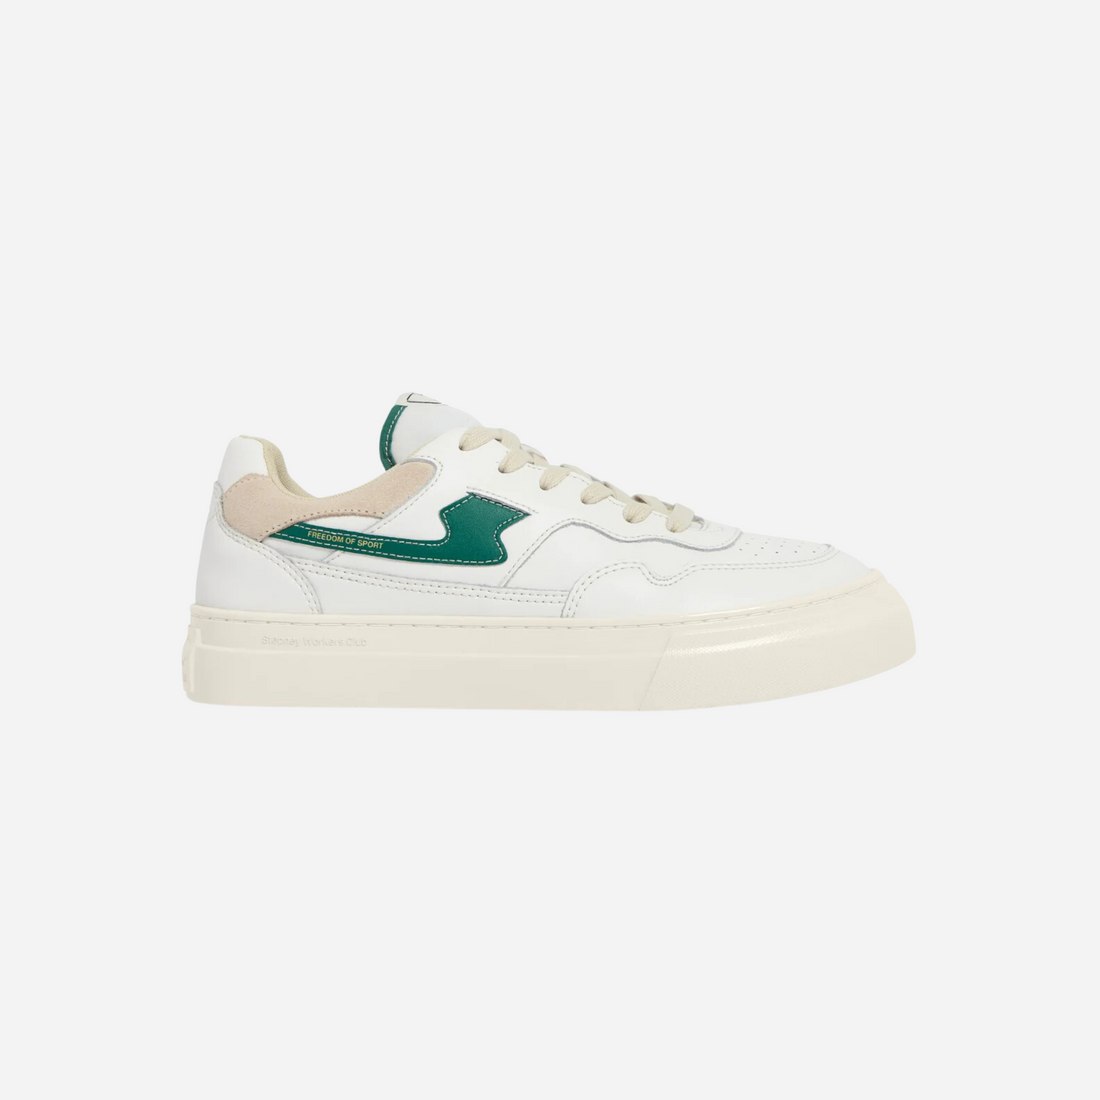 Stepney Workers Club Pearl S-Strike Leather White/Green - Hympala Store 